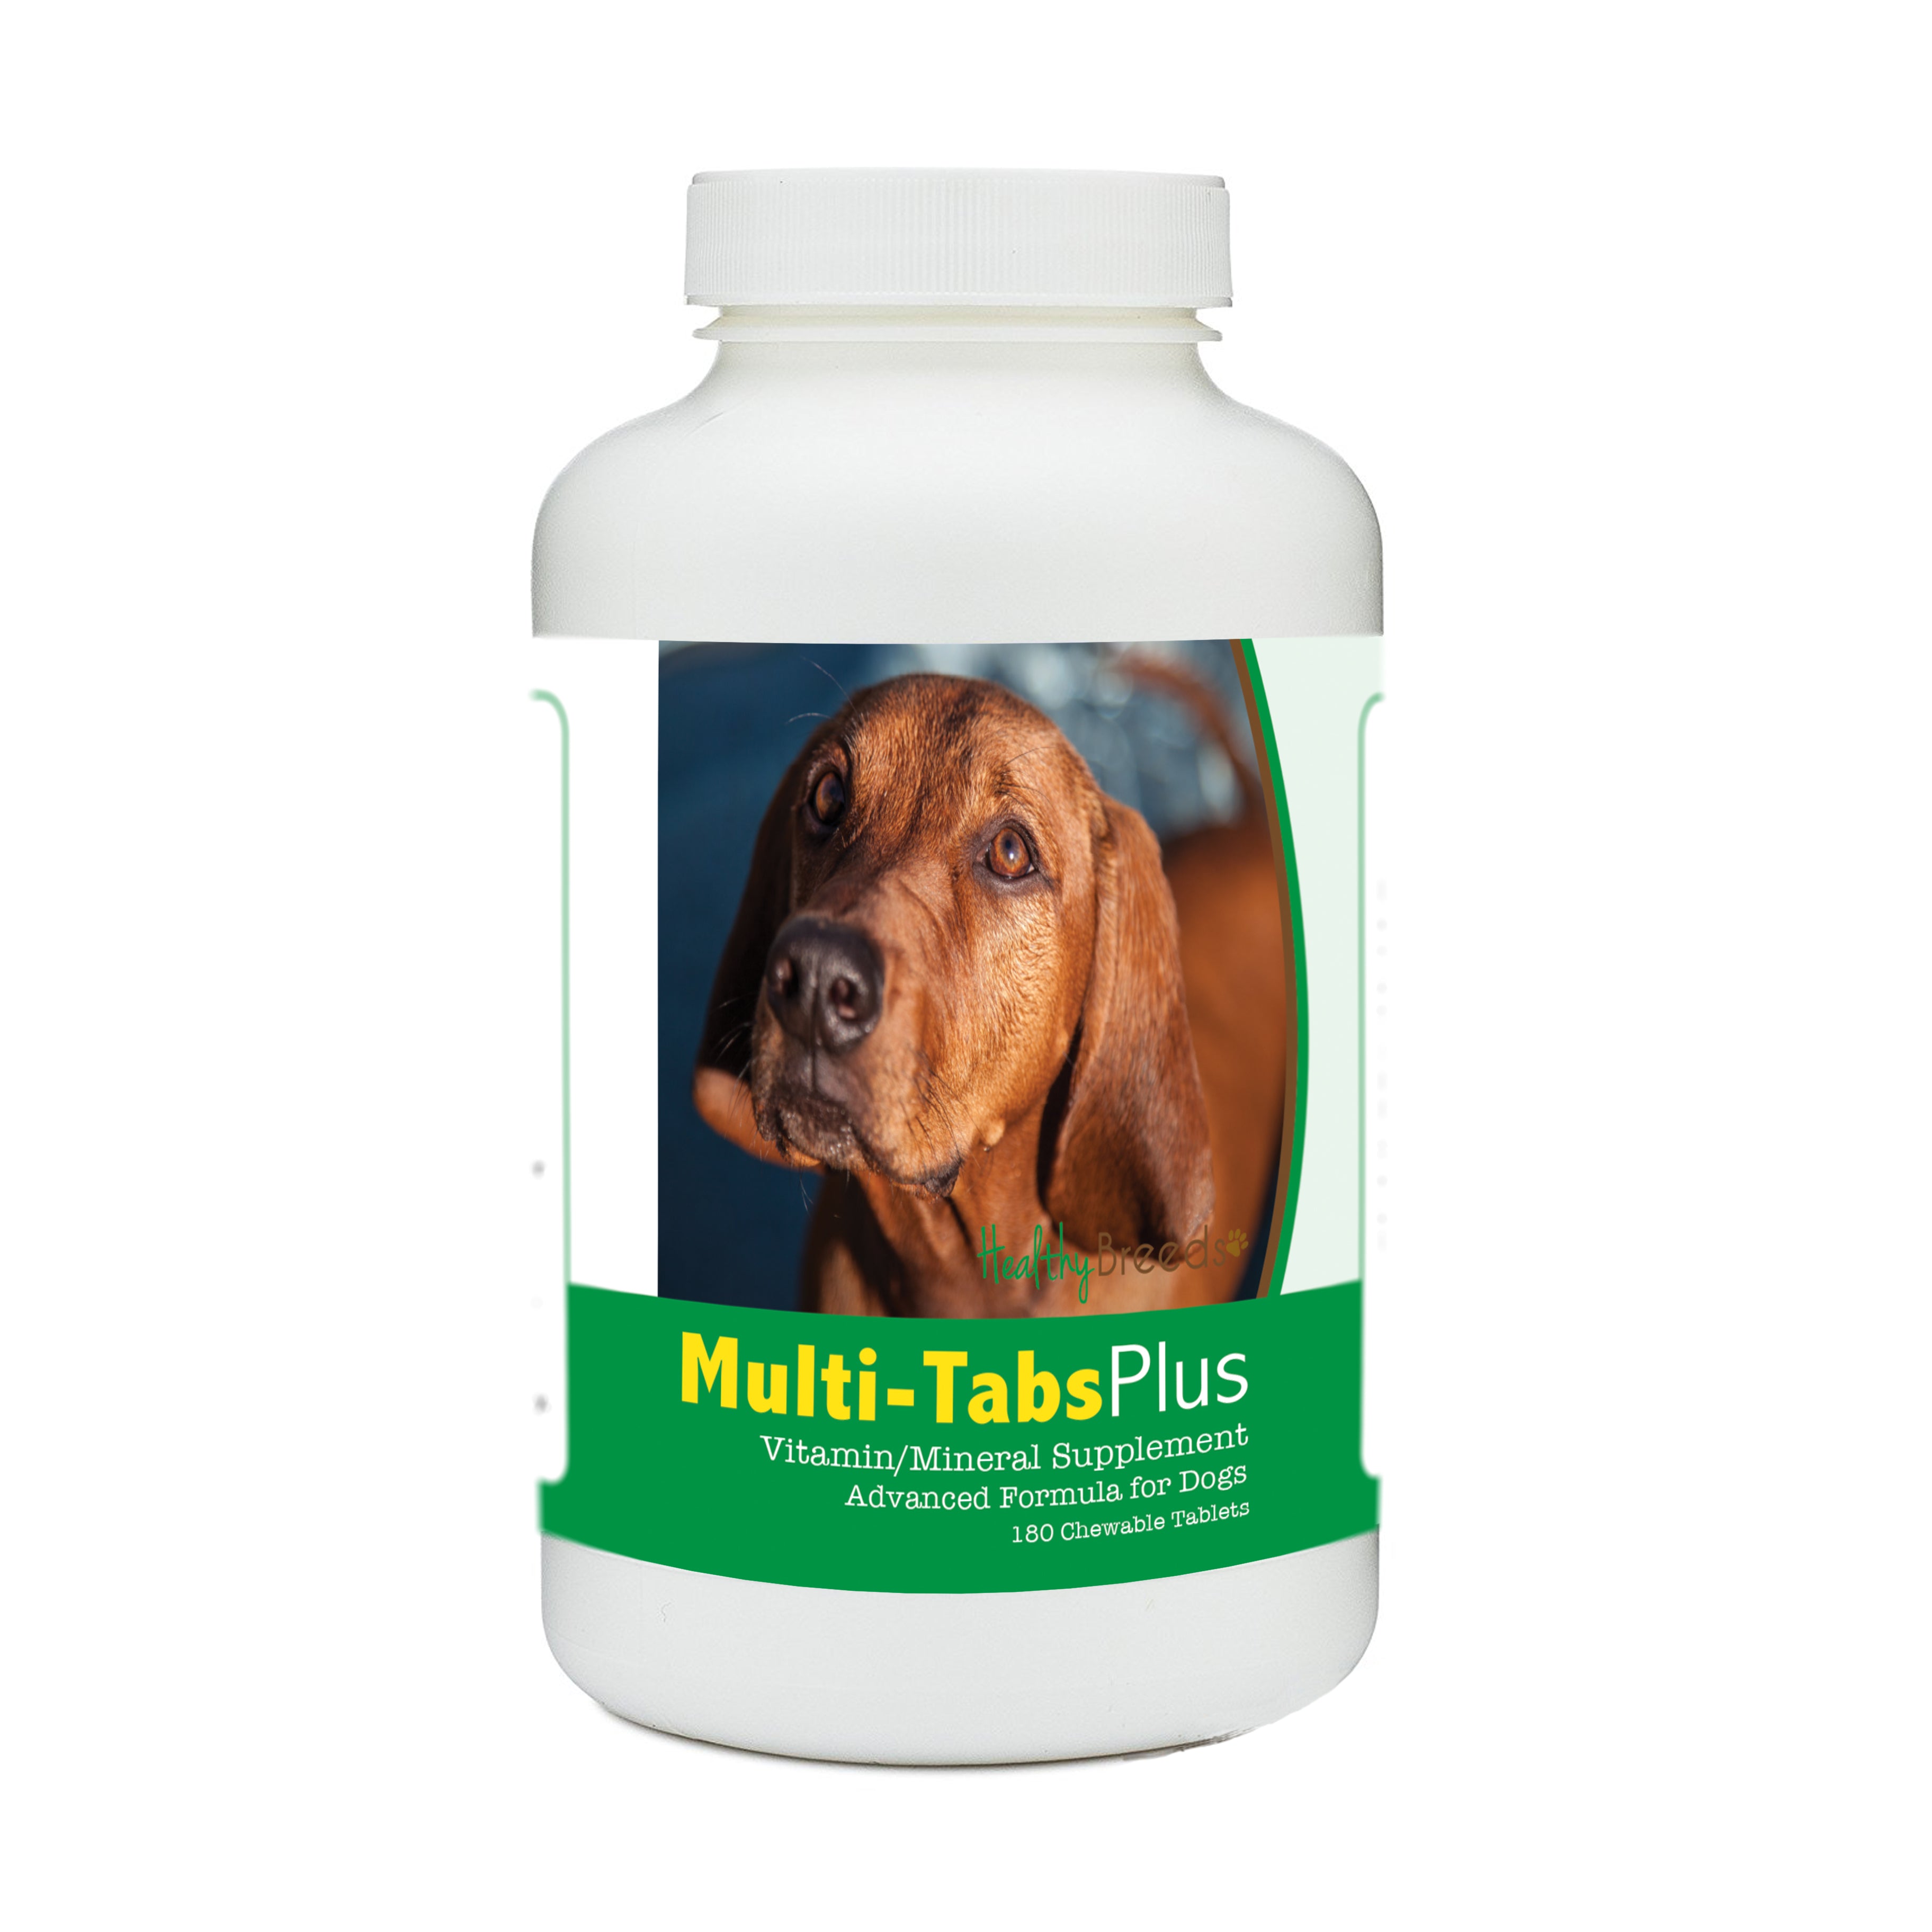 Redbone Coonhound Multi-Tabs Plus Chewable Tablets 180 Count